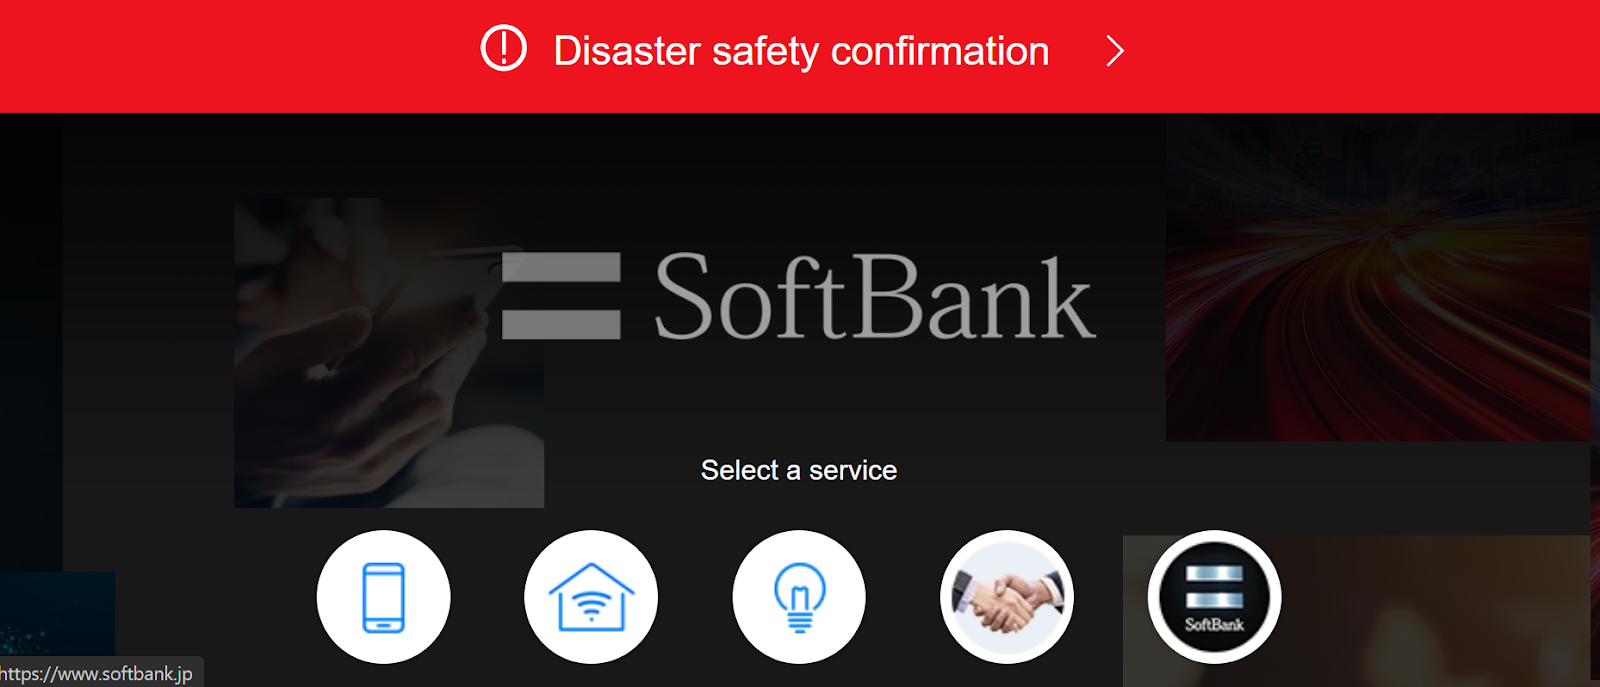 SoftBank website snapshot highlighting the services it offers.